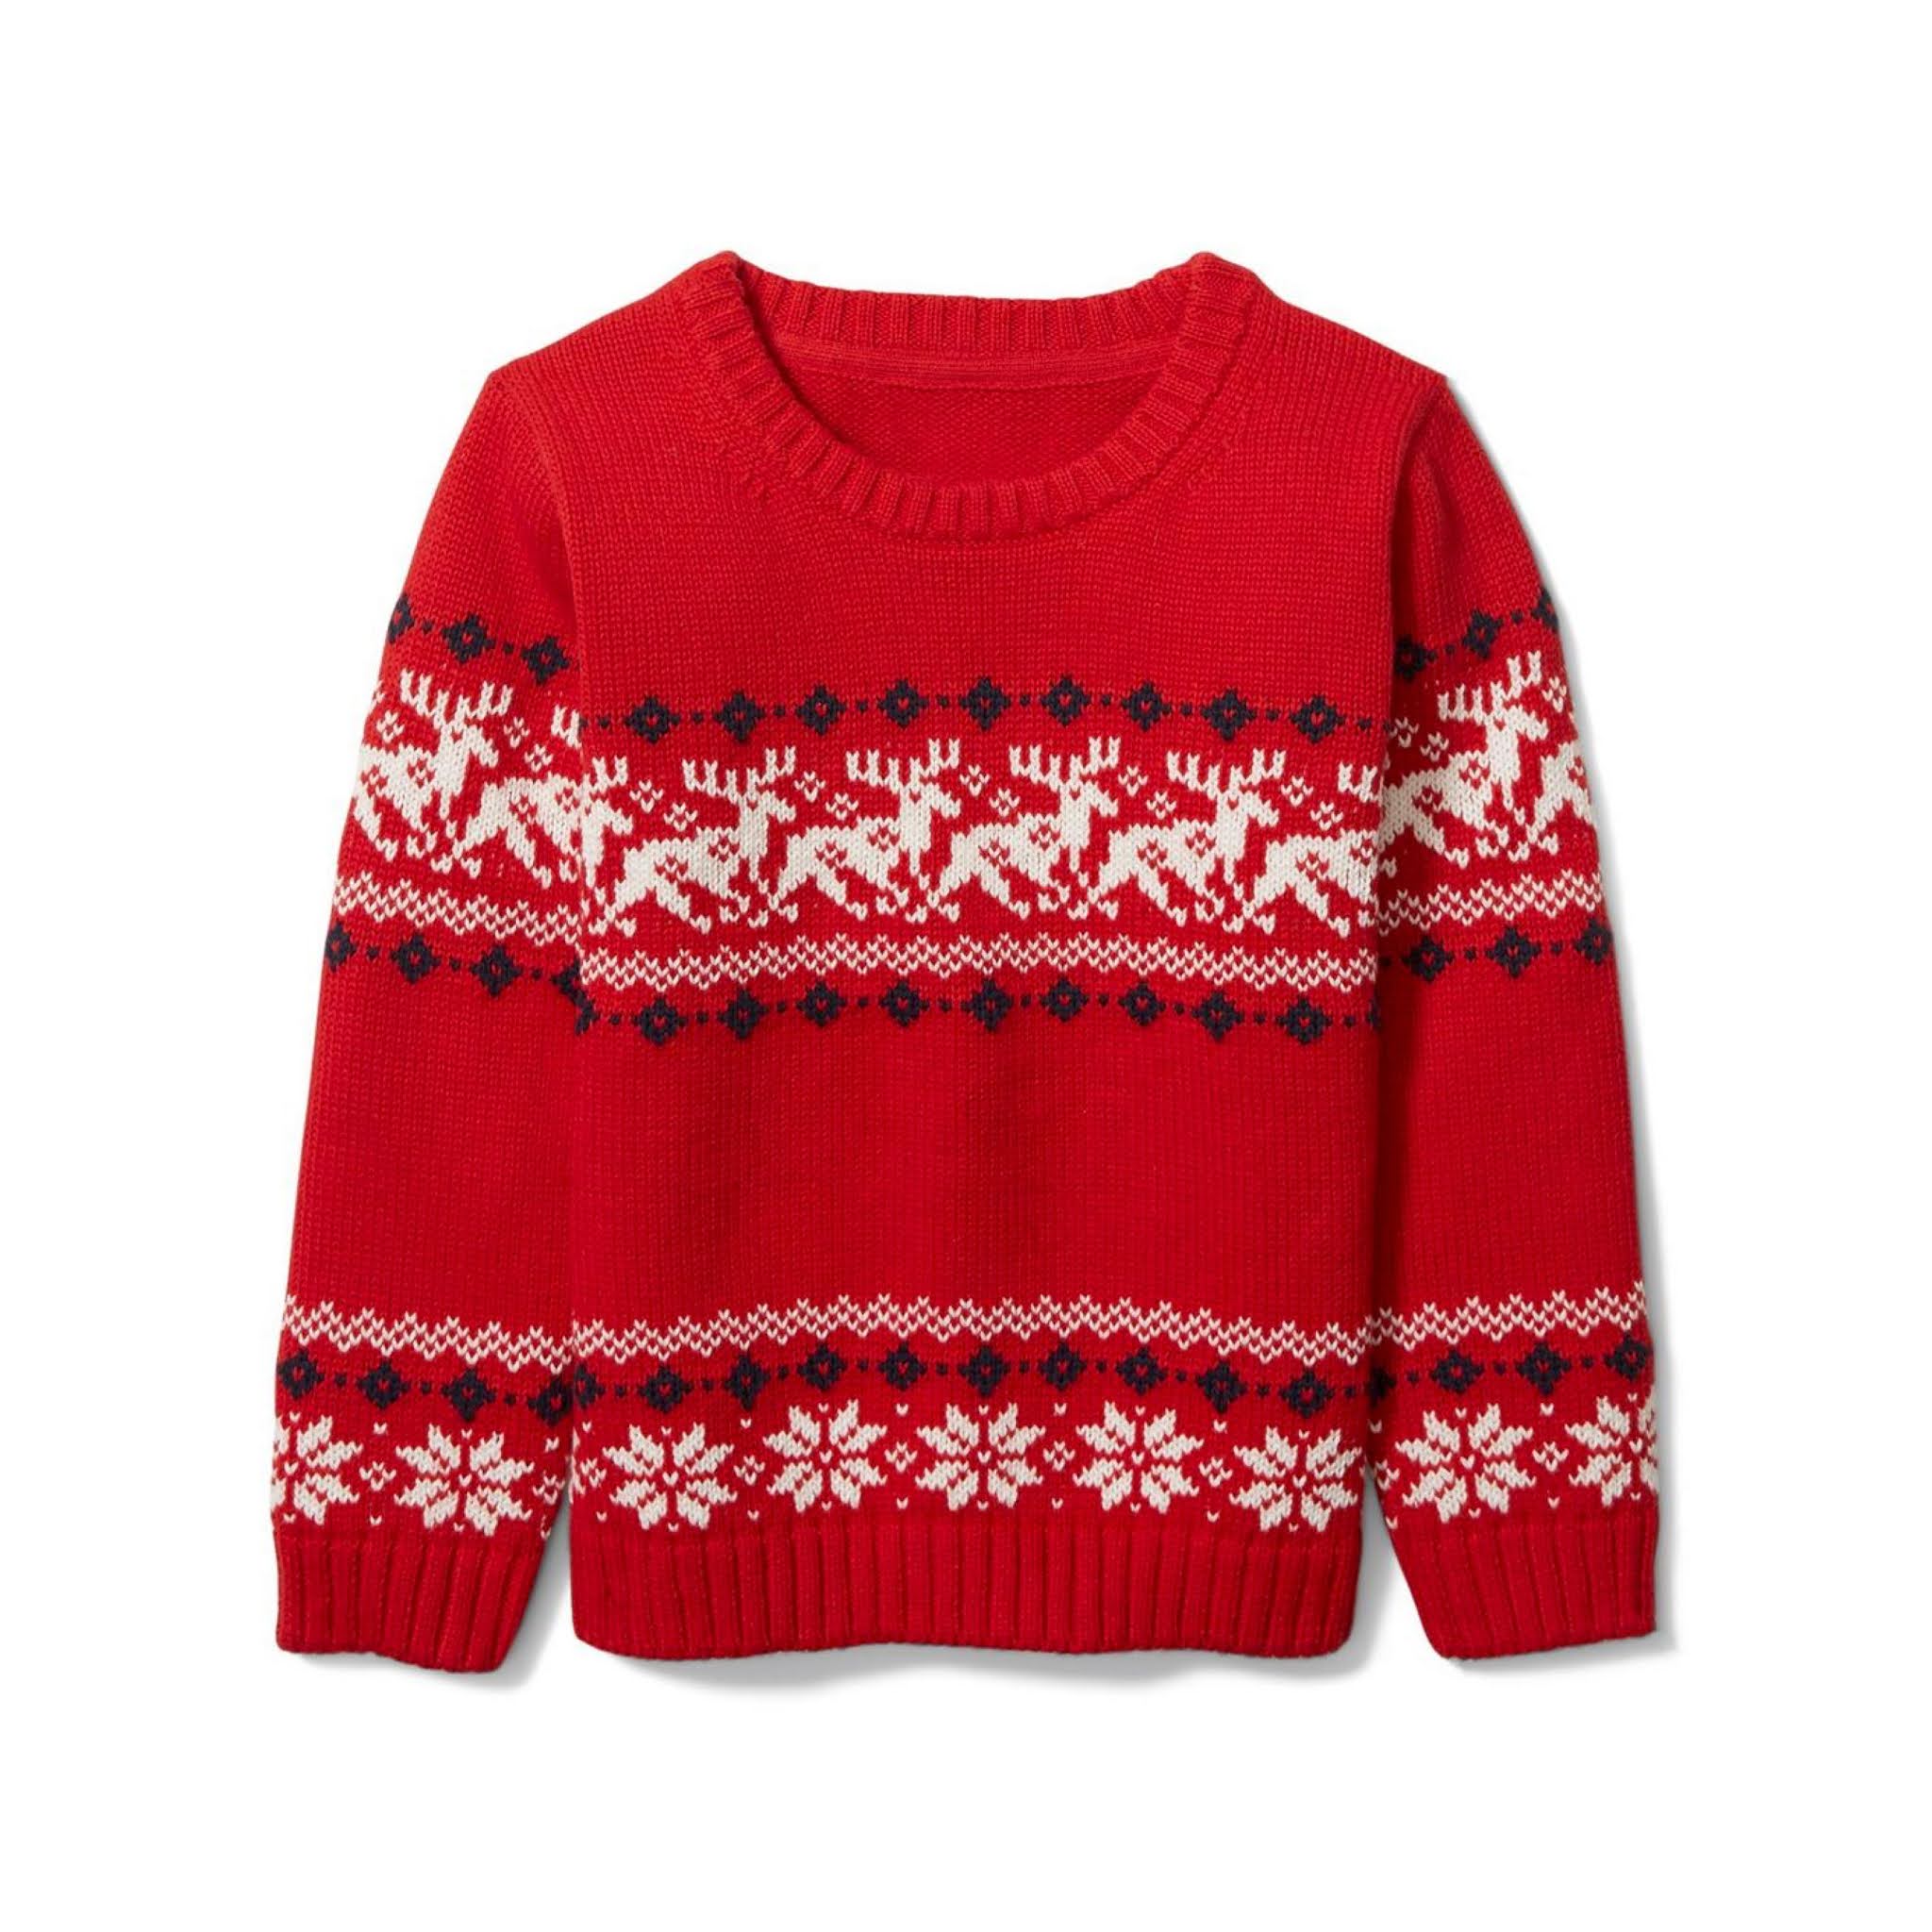 Toddler & Kids Red Reindeer Sweater from Janie and Jack